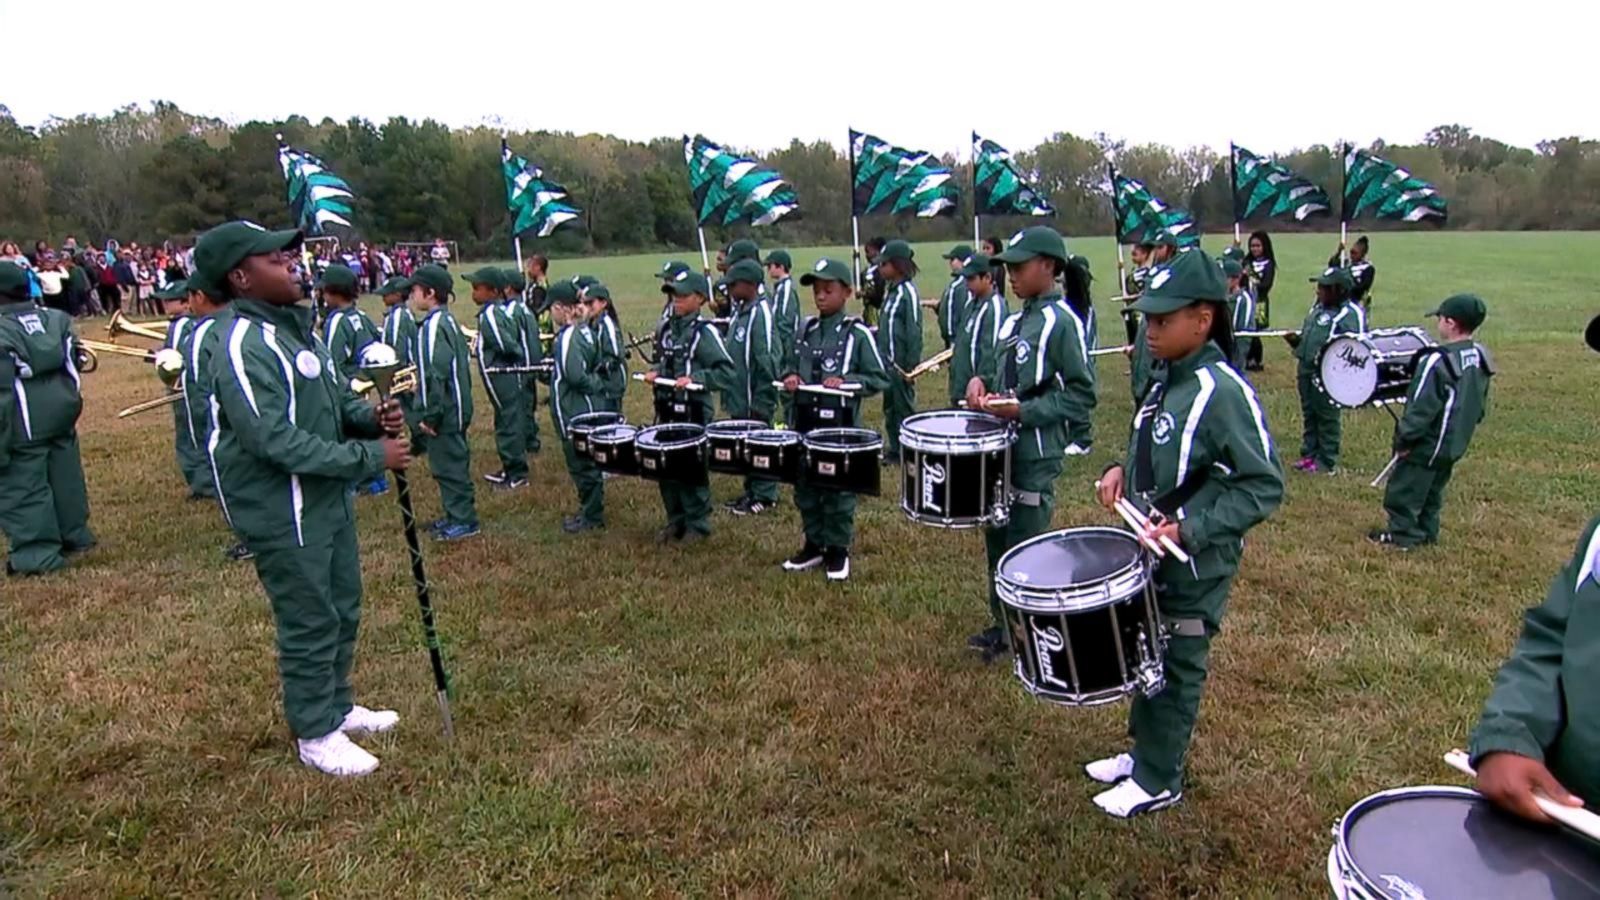 Maryland Elementary School S Drumline On A Mission To Make Their Images, Photos, Reviews